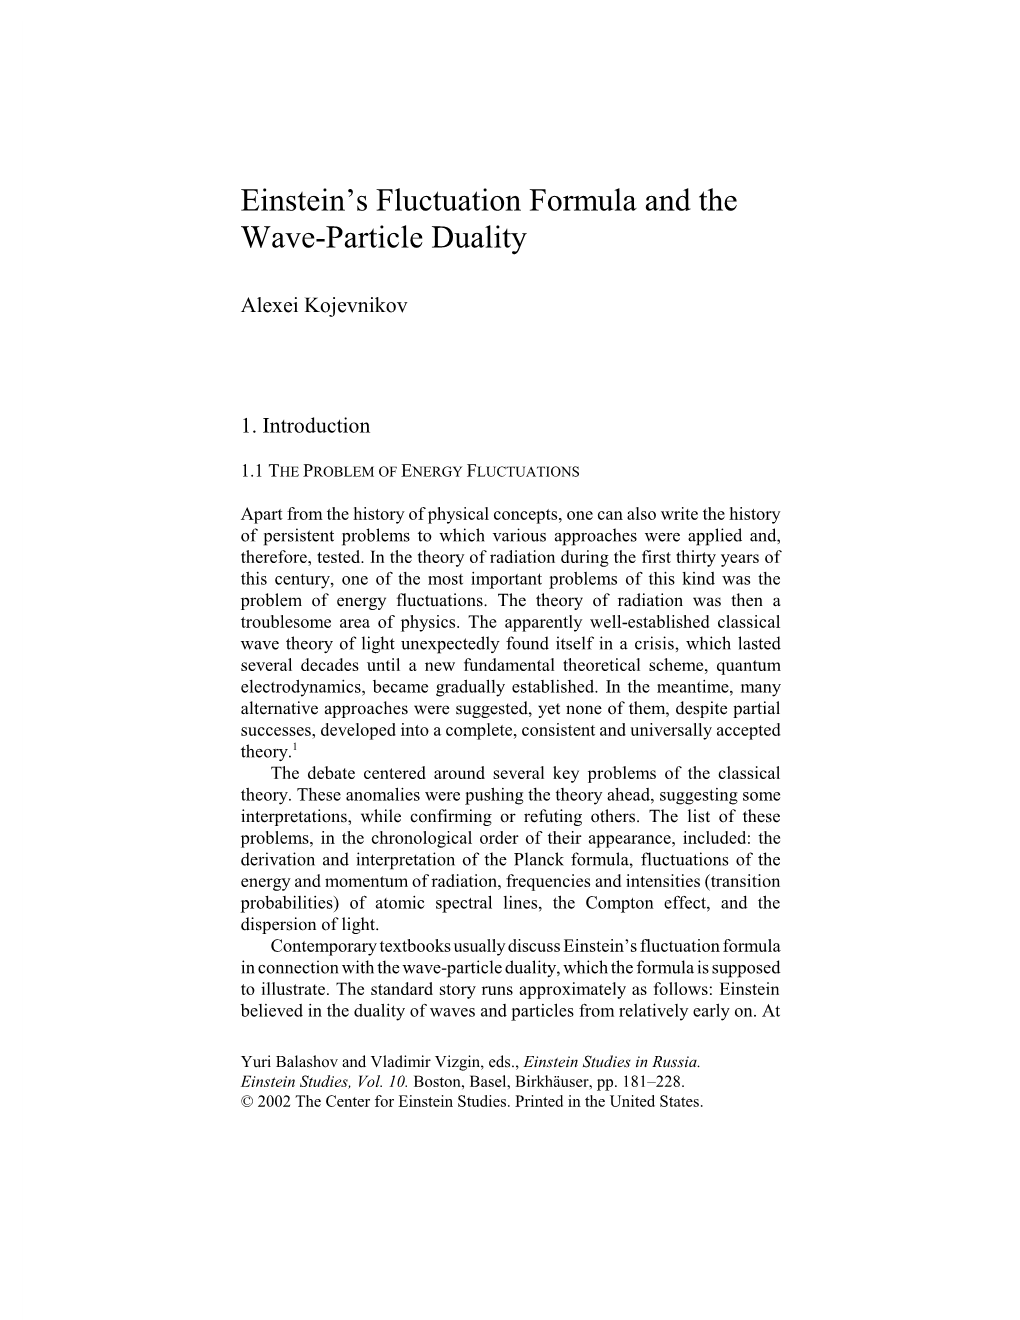 Einstein's Fluctuation Formula and the Wave-Particle Duality